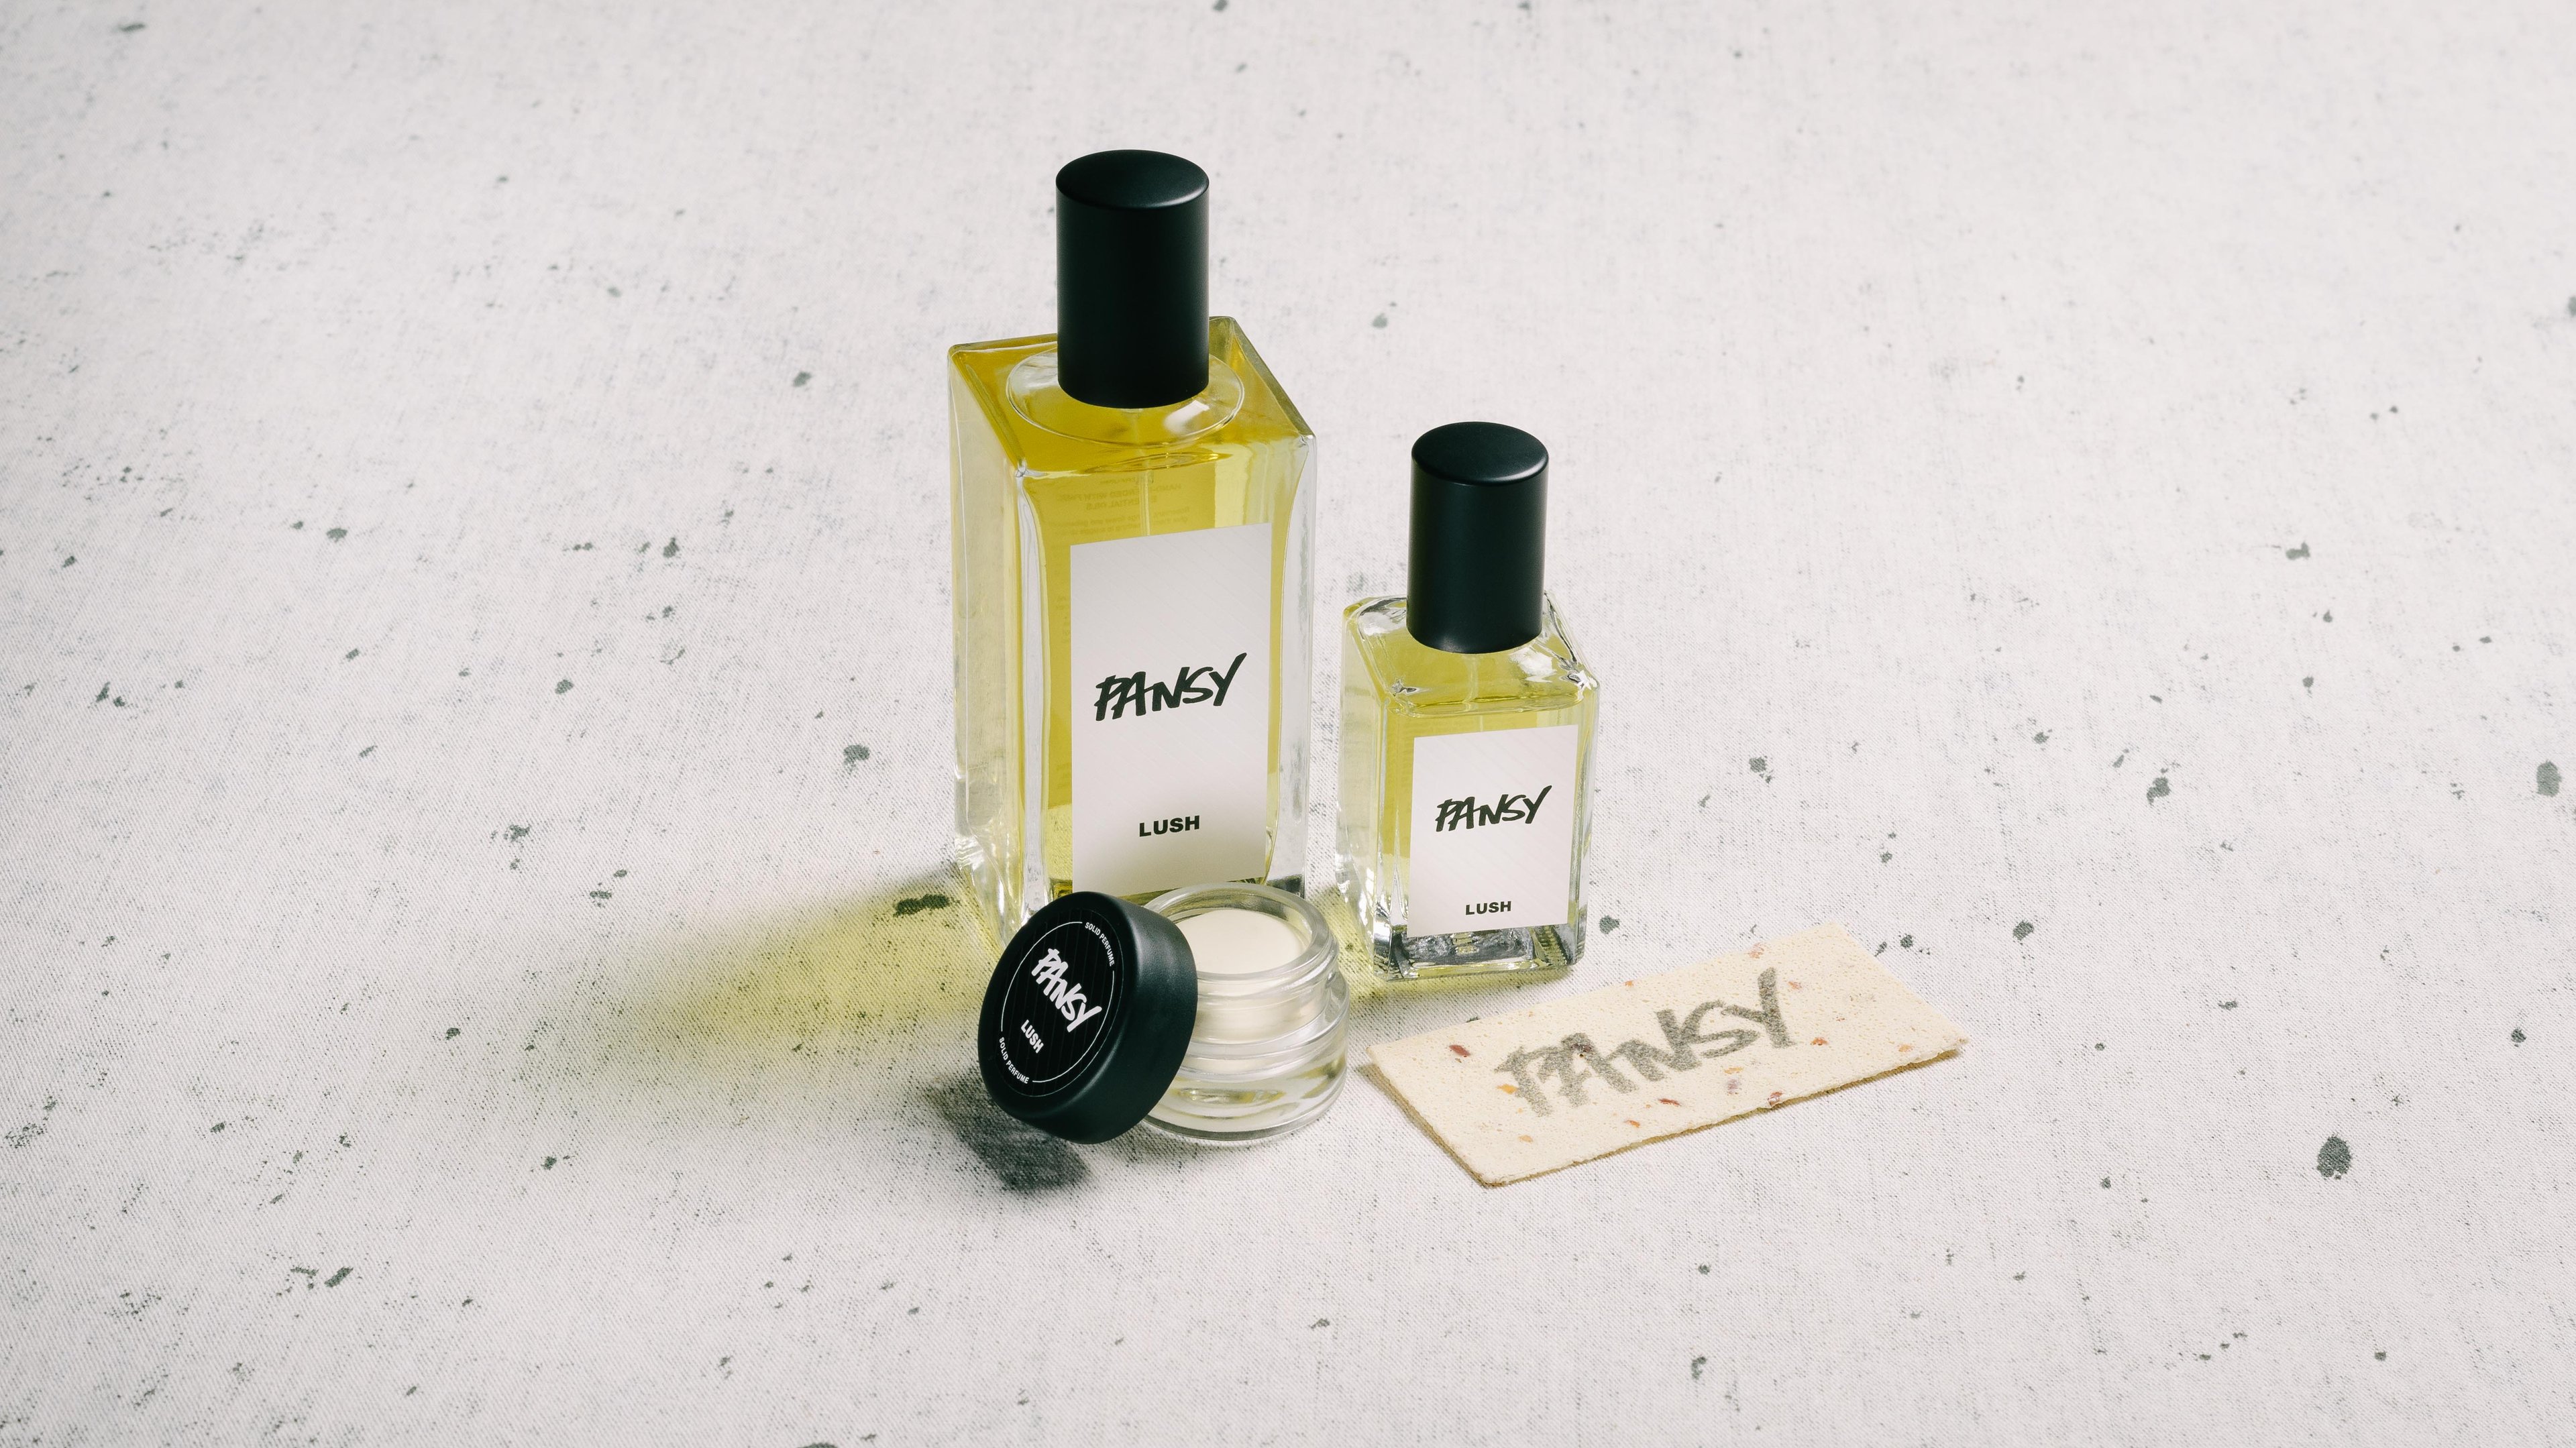 The whole Pansy fragrance collection is displayed on a white surface, flecked with grey.